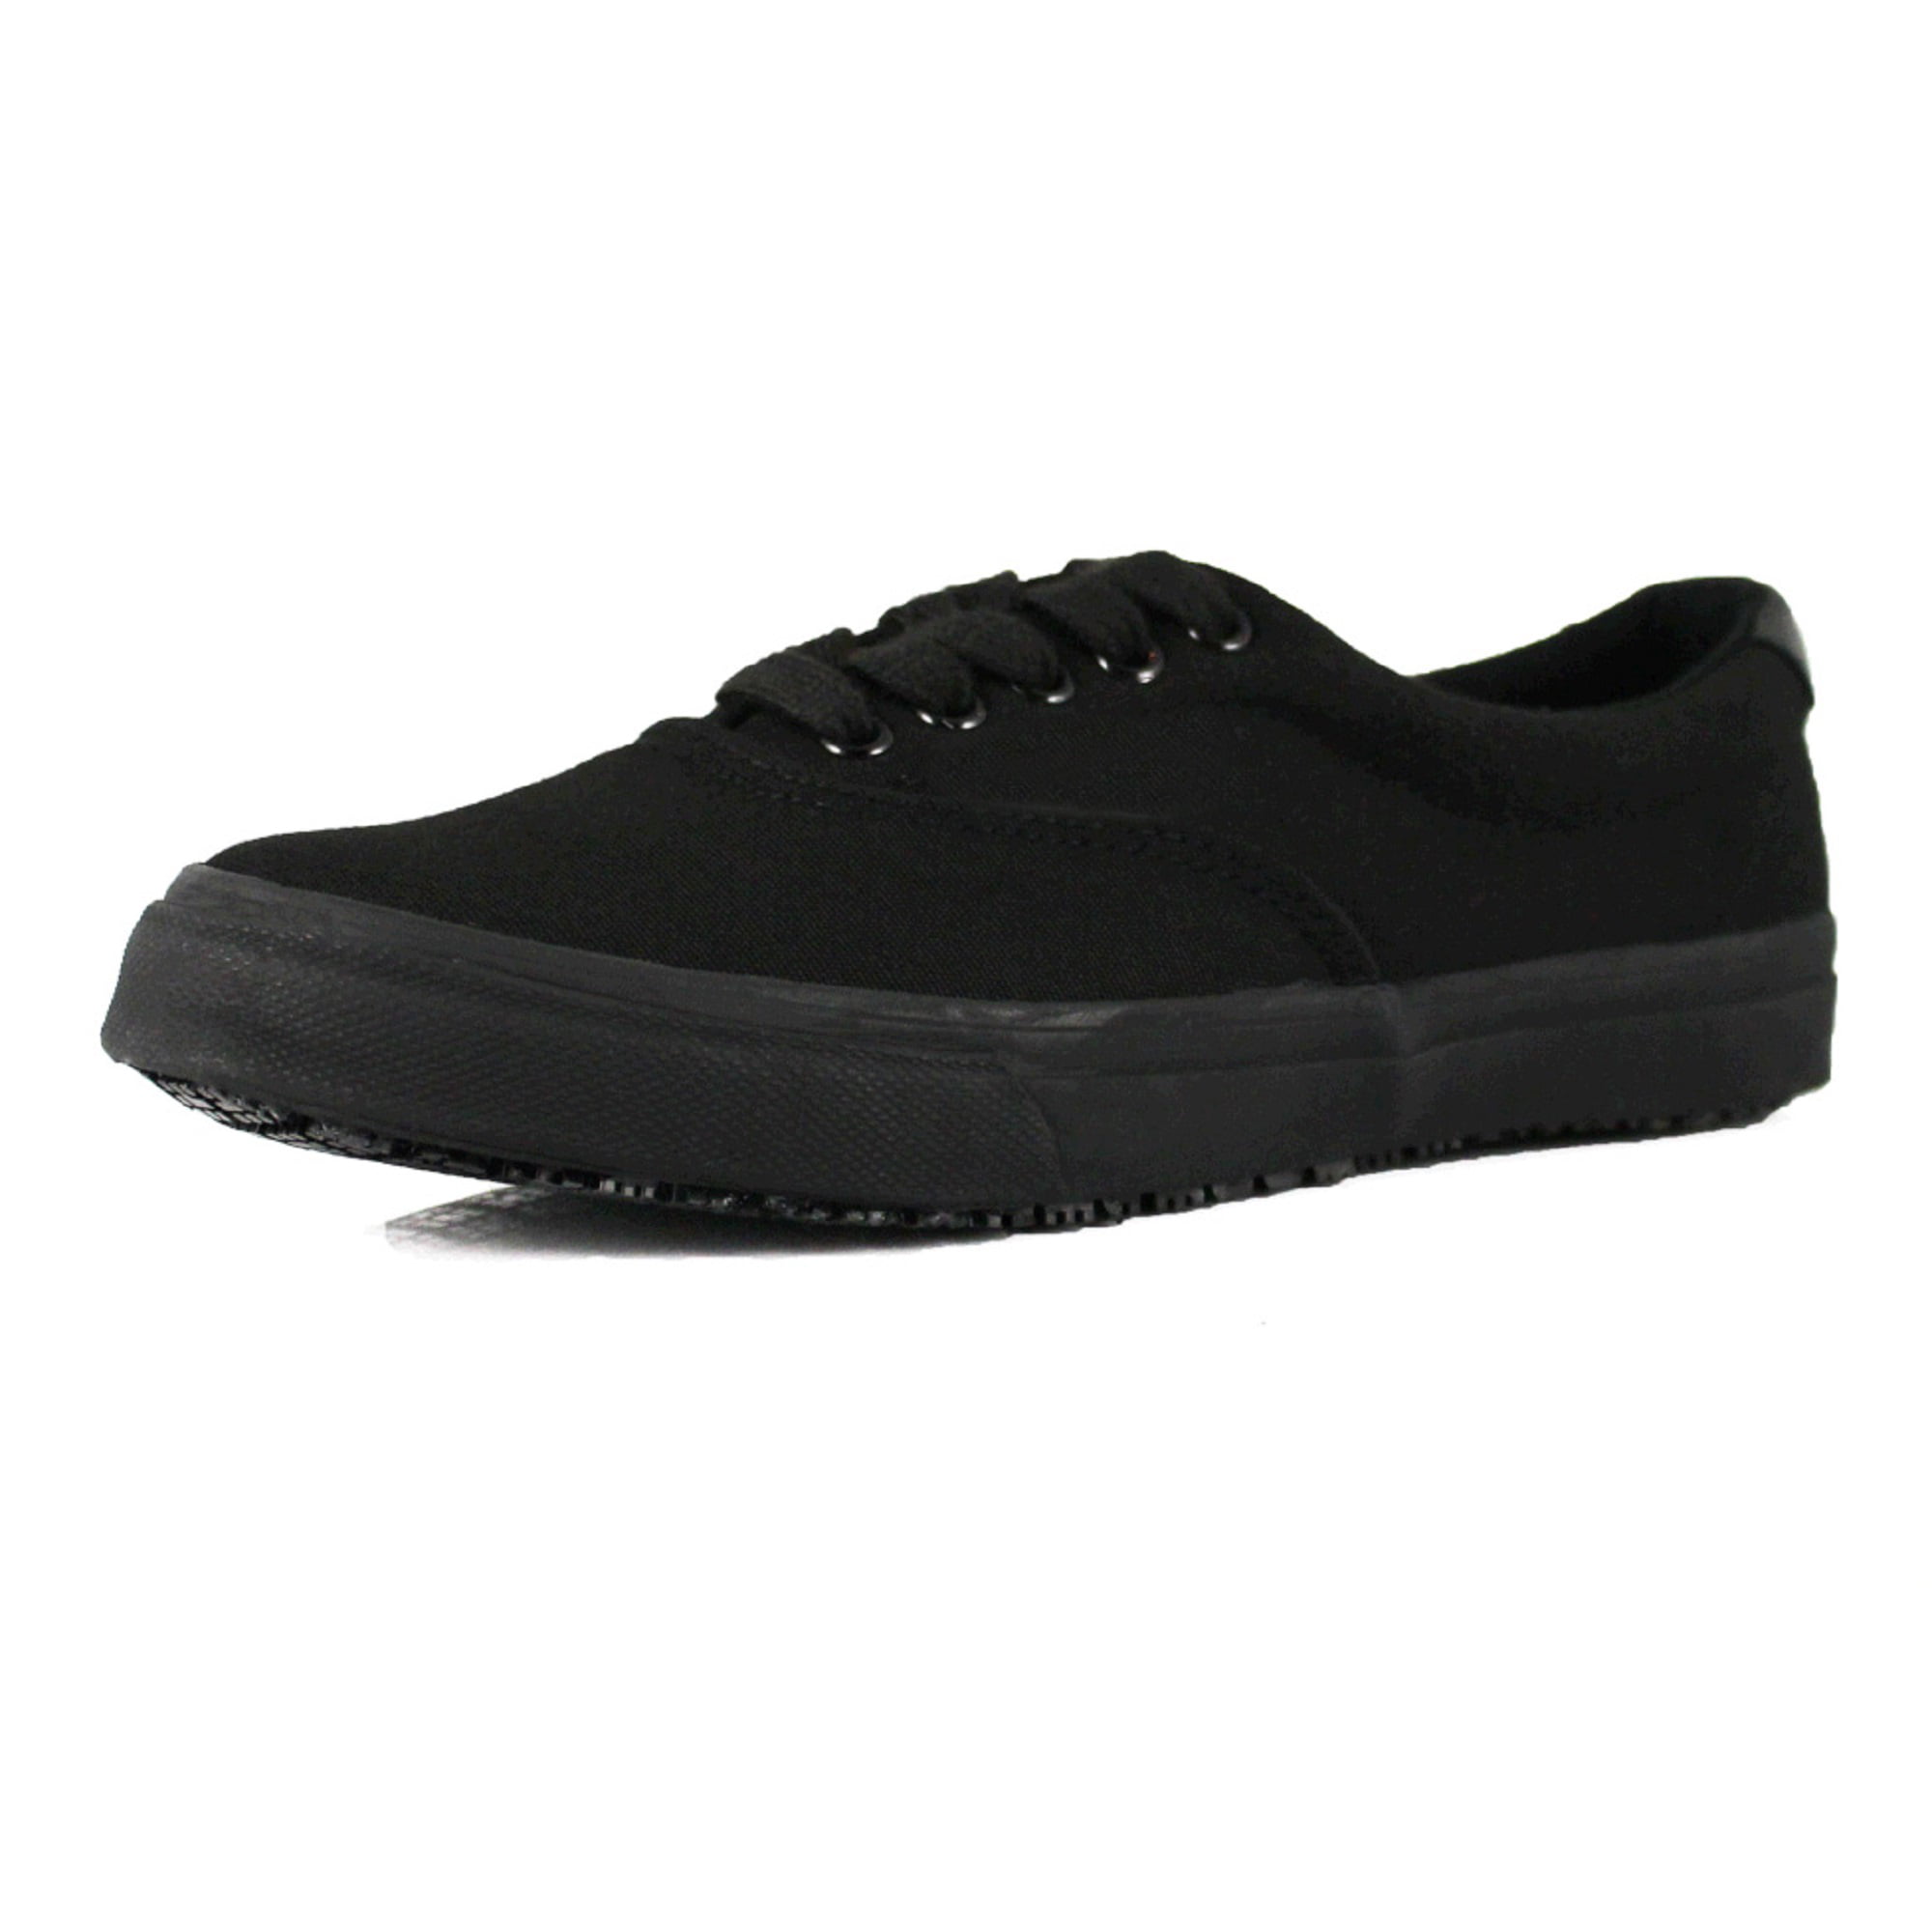 black water resistant shoes